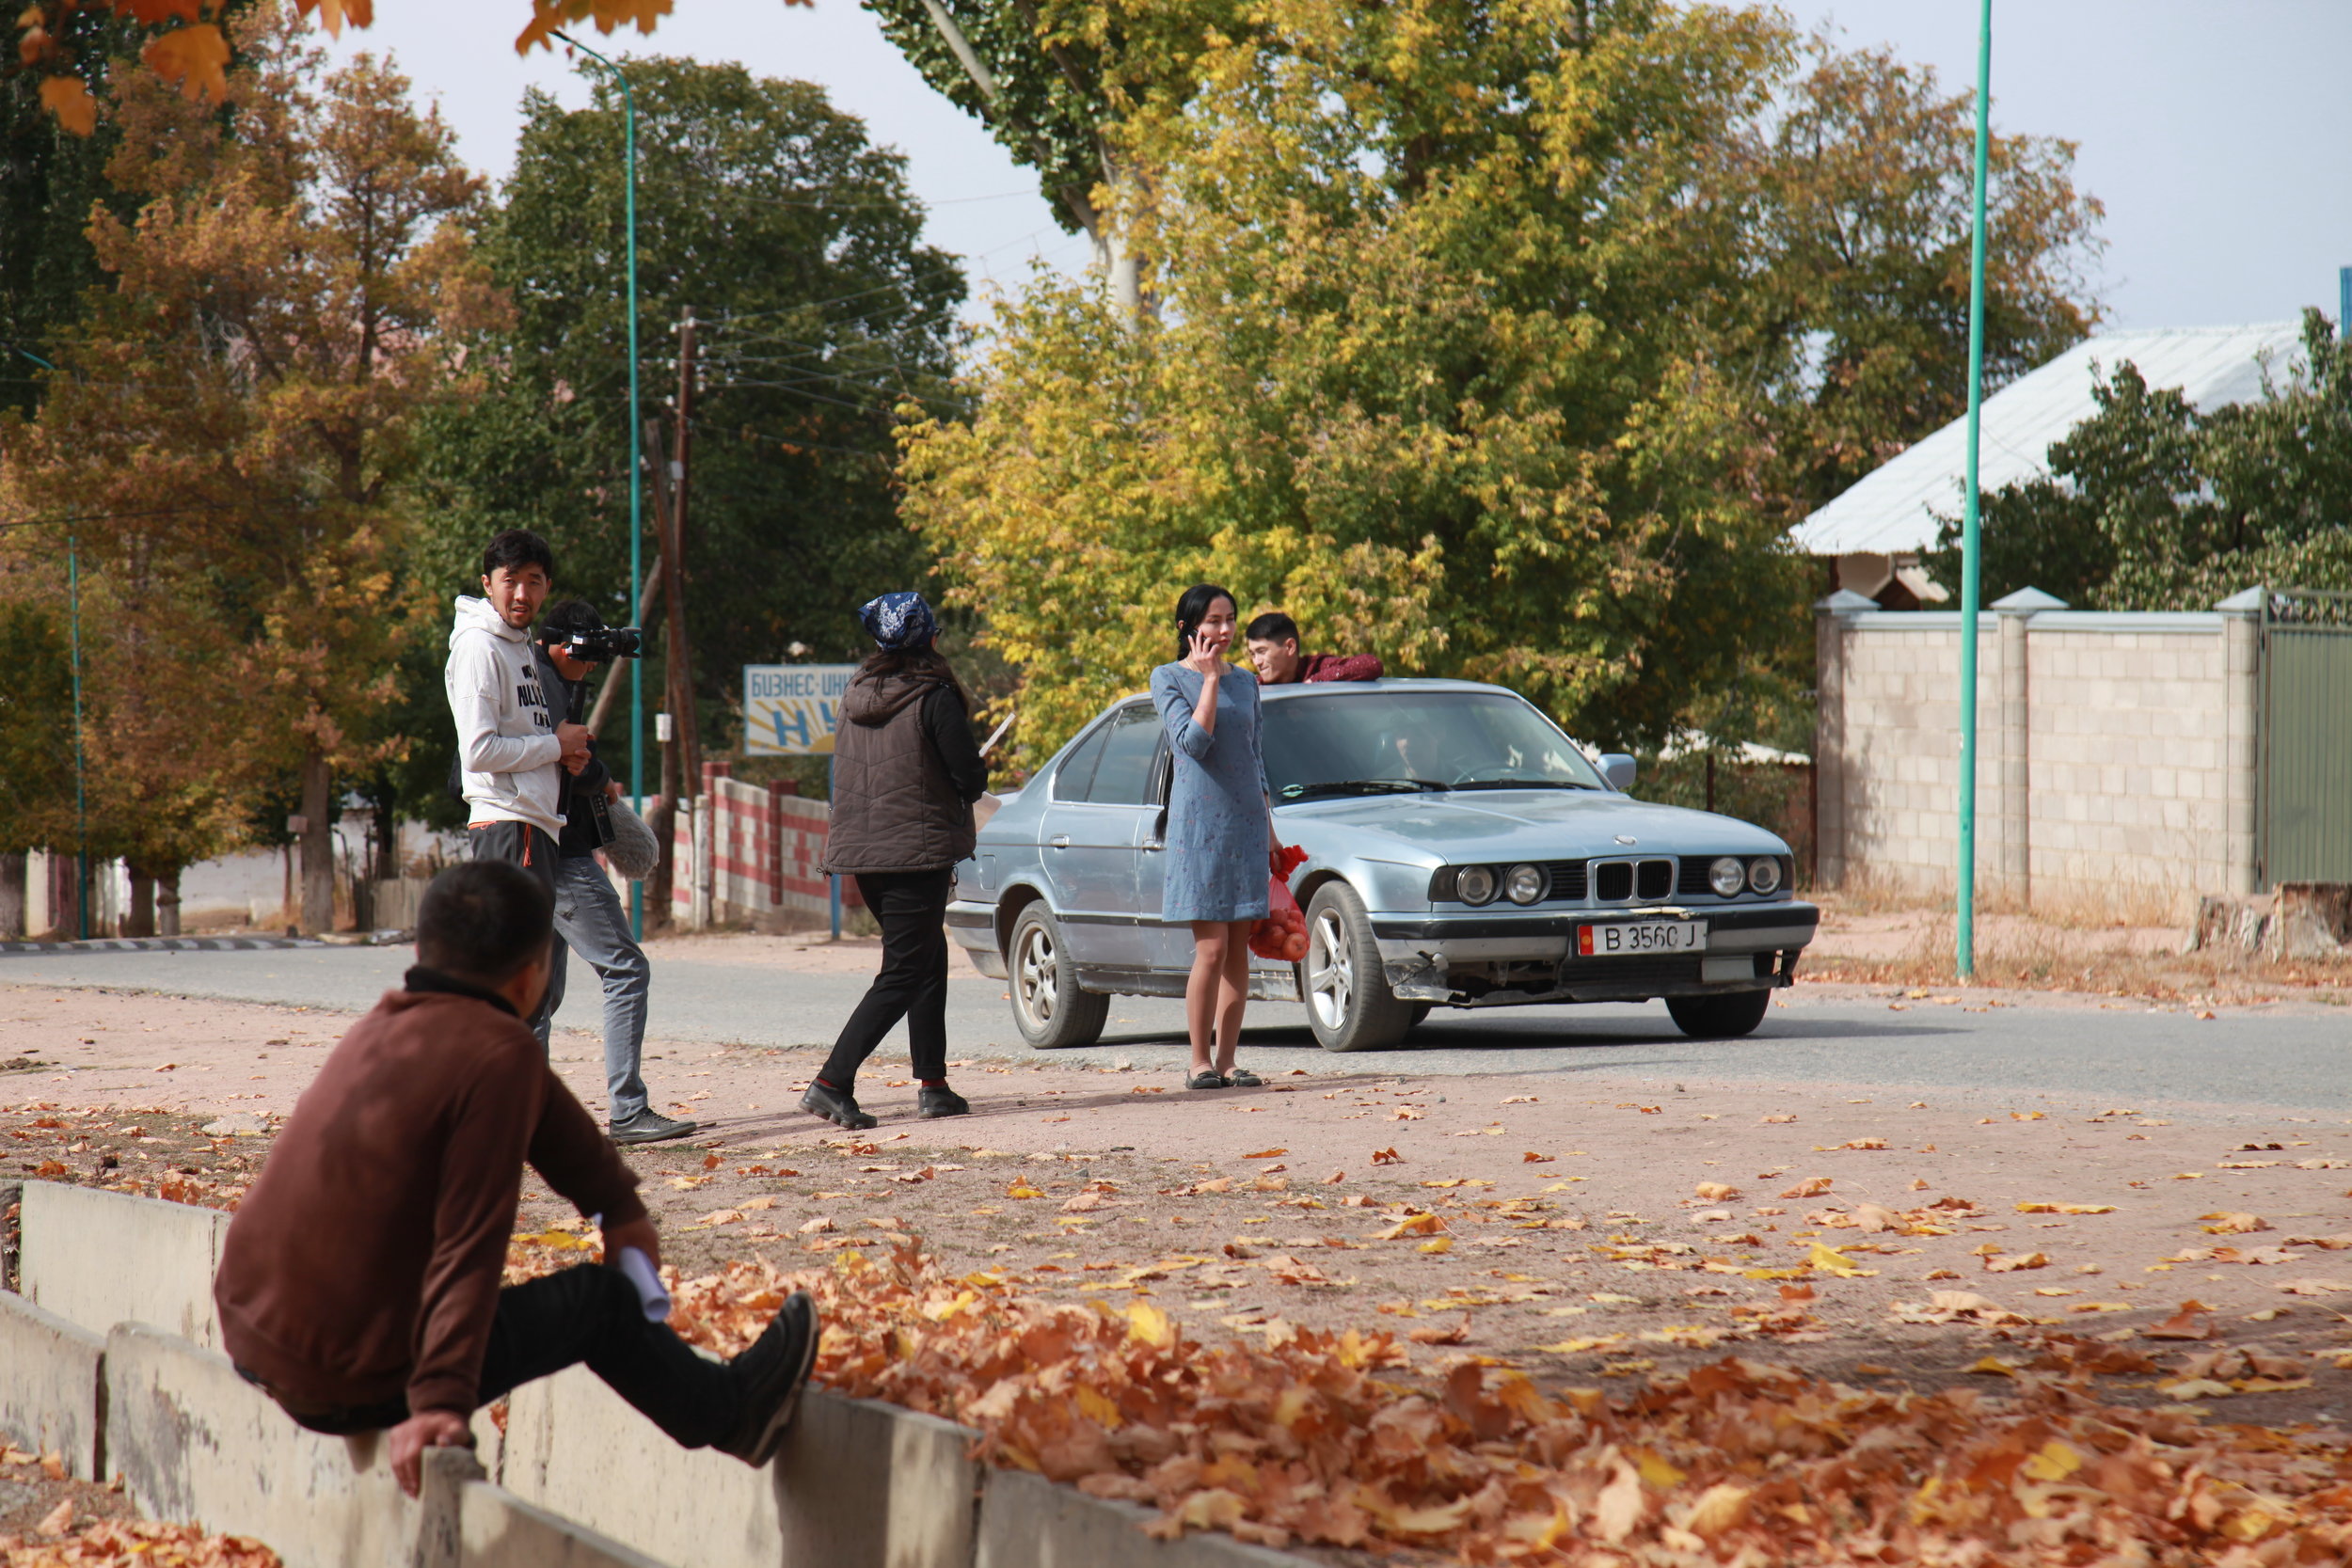 On set: Mira, played by Anara Taalaybek Kyzy, talks on the phone as a car draws up behind her